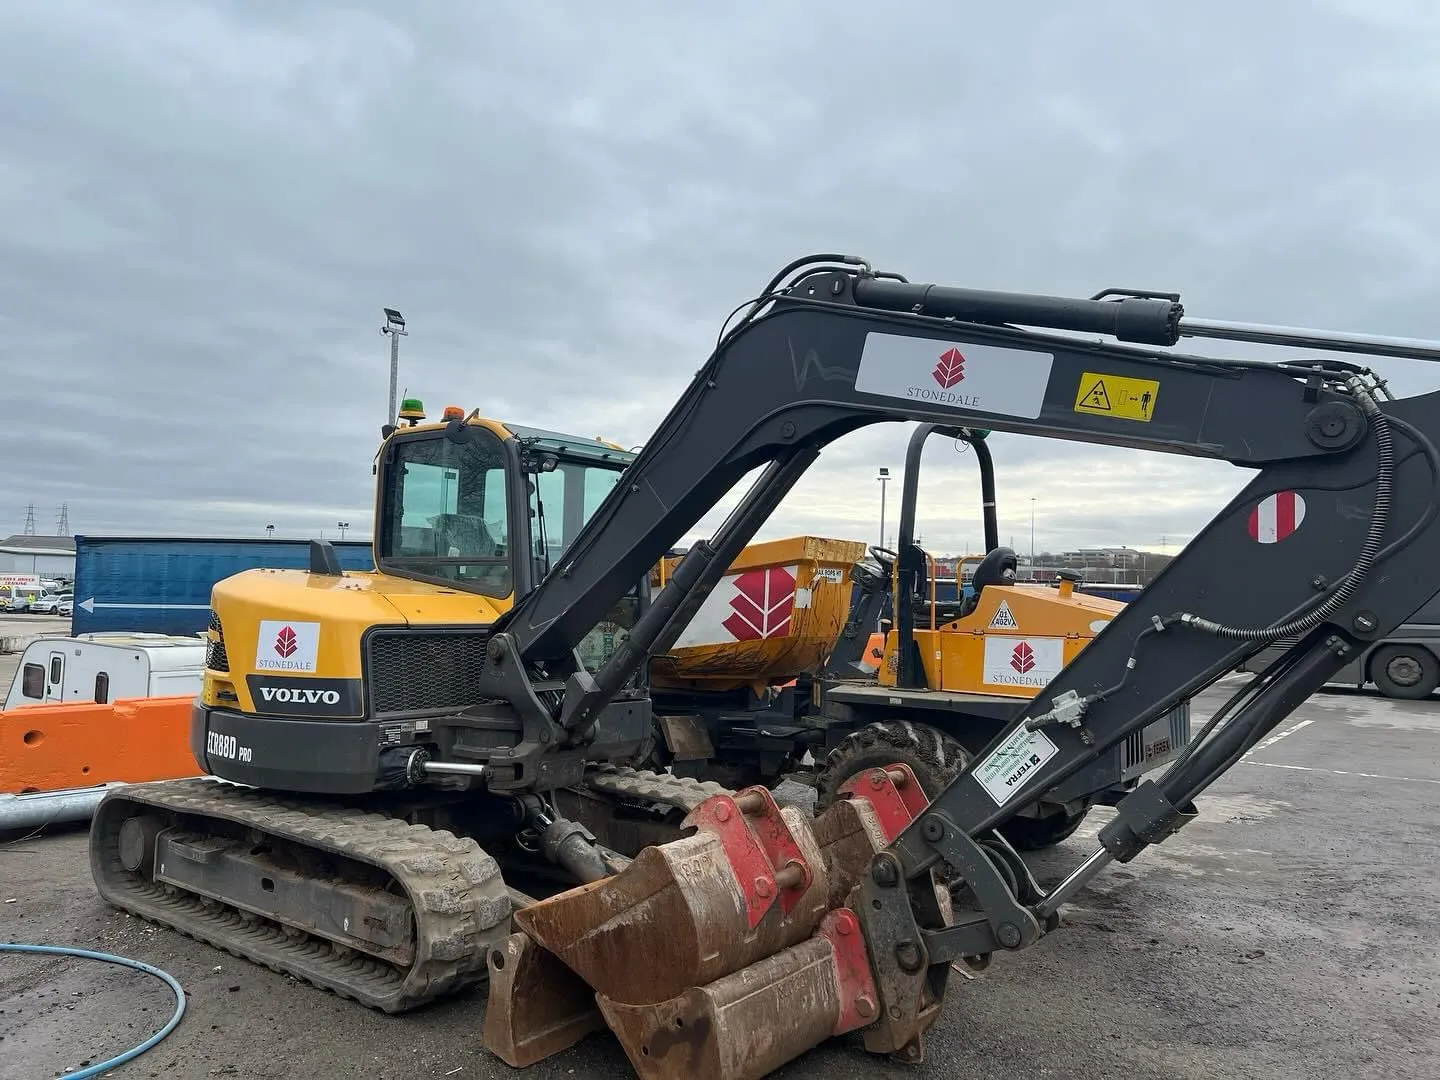 9 tonne Volvo large excavator for work on construction sites plant hire in West Yorkshire Cleckheaton